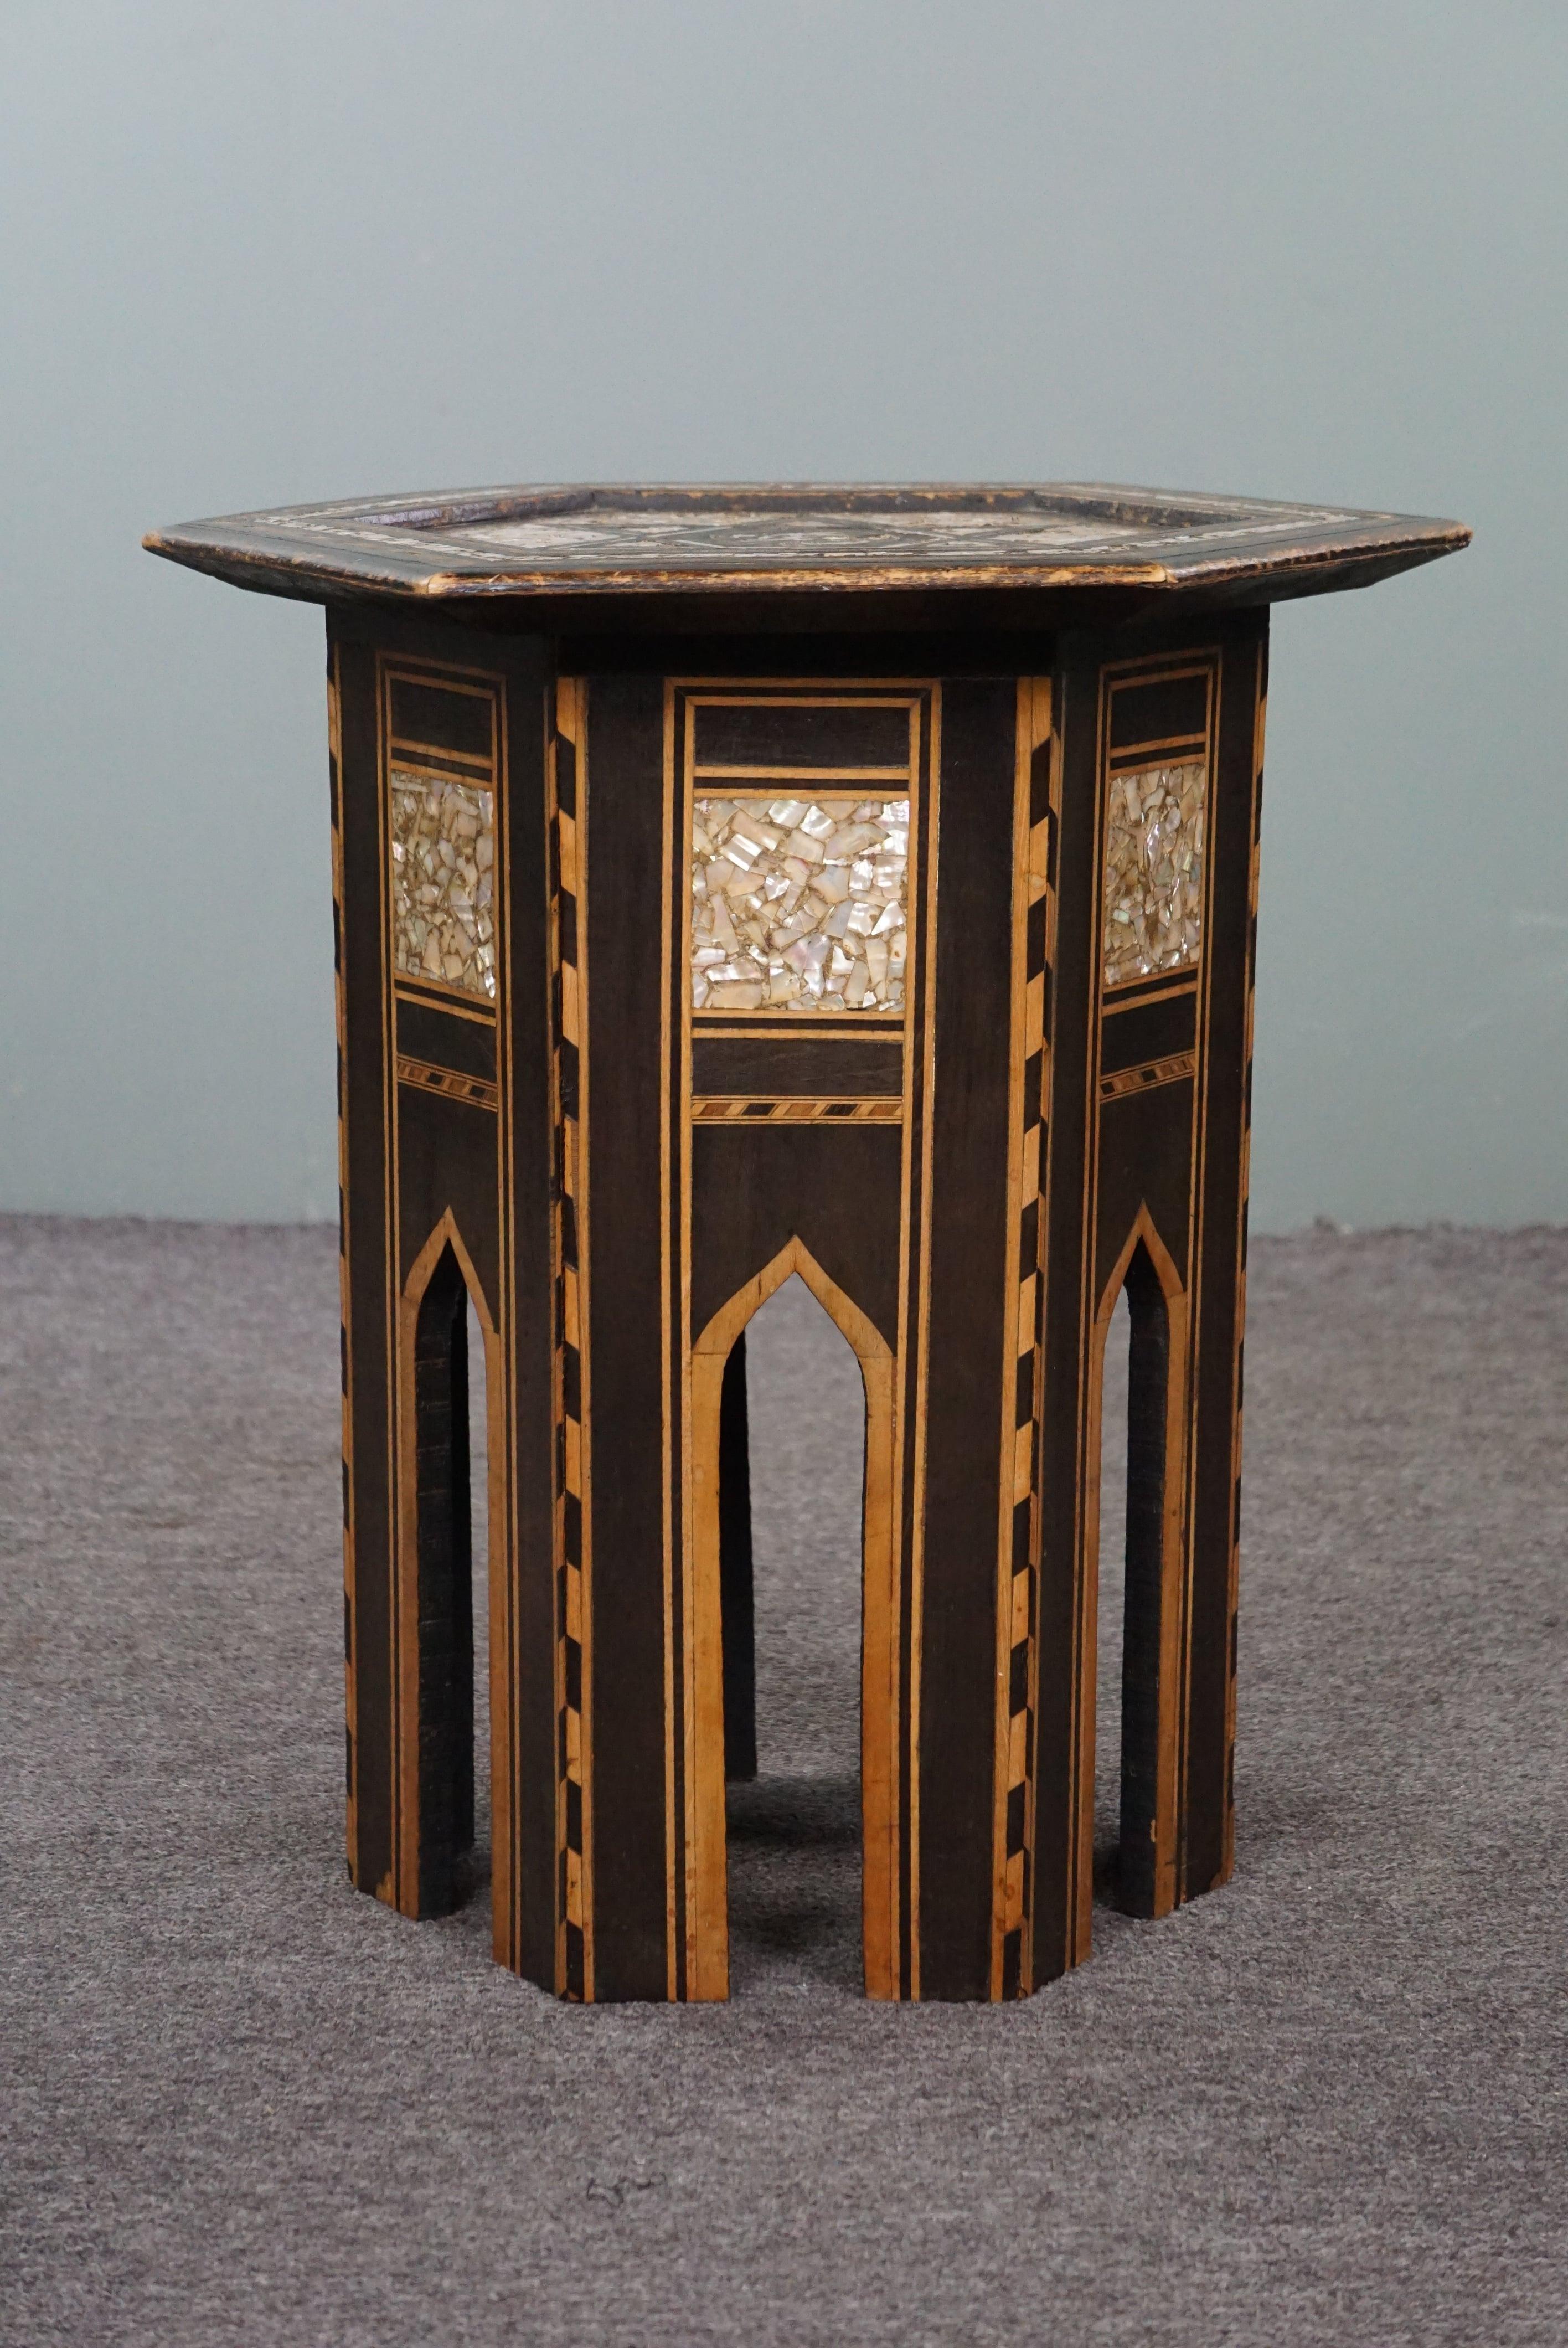 With pride we offer you this Oriental side table featuring a unique mosaic pattern. Discover this beautiful antique and unique Oriental pearl mosaic side table! With genuine joy, we offer this extraordinary masterpiece for sale. This stunning table